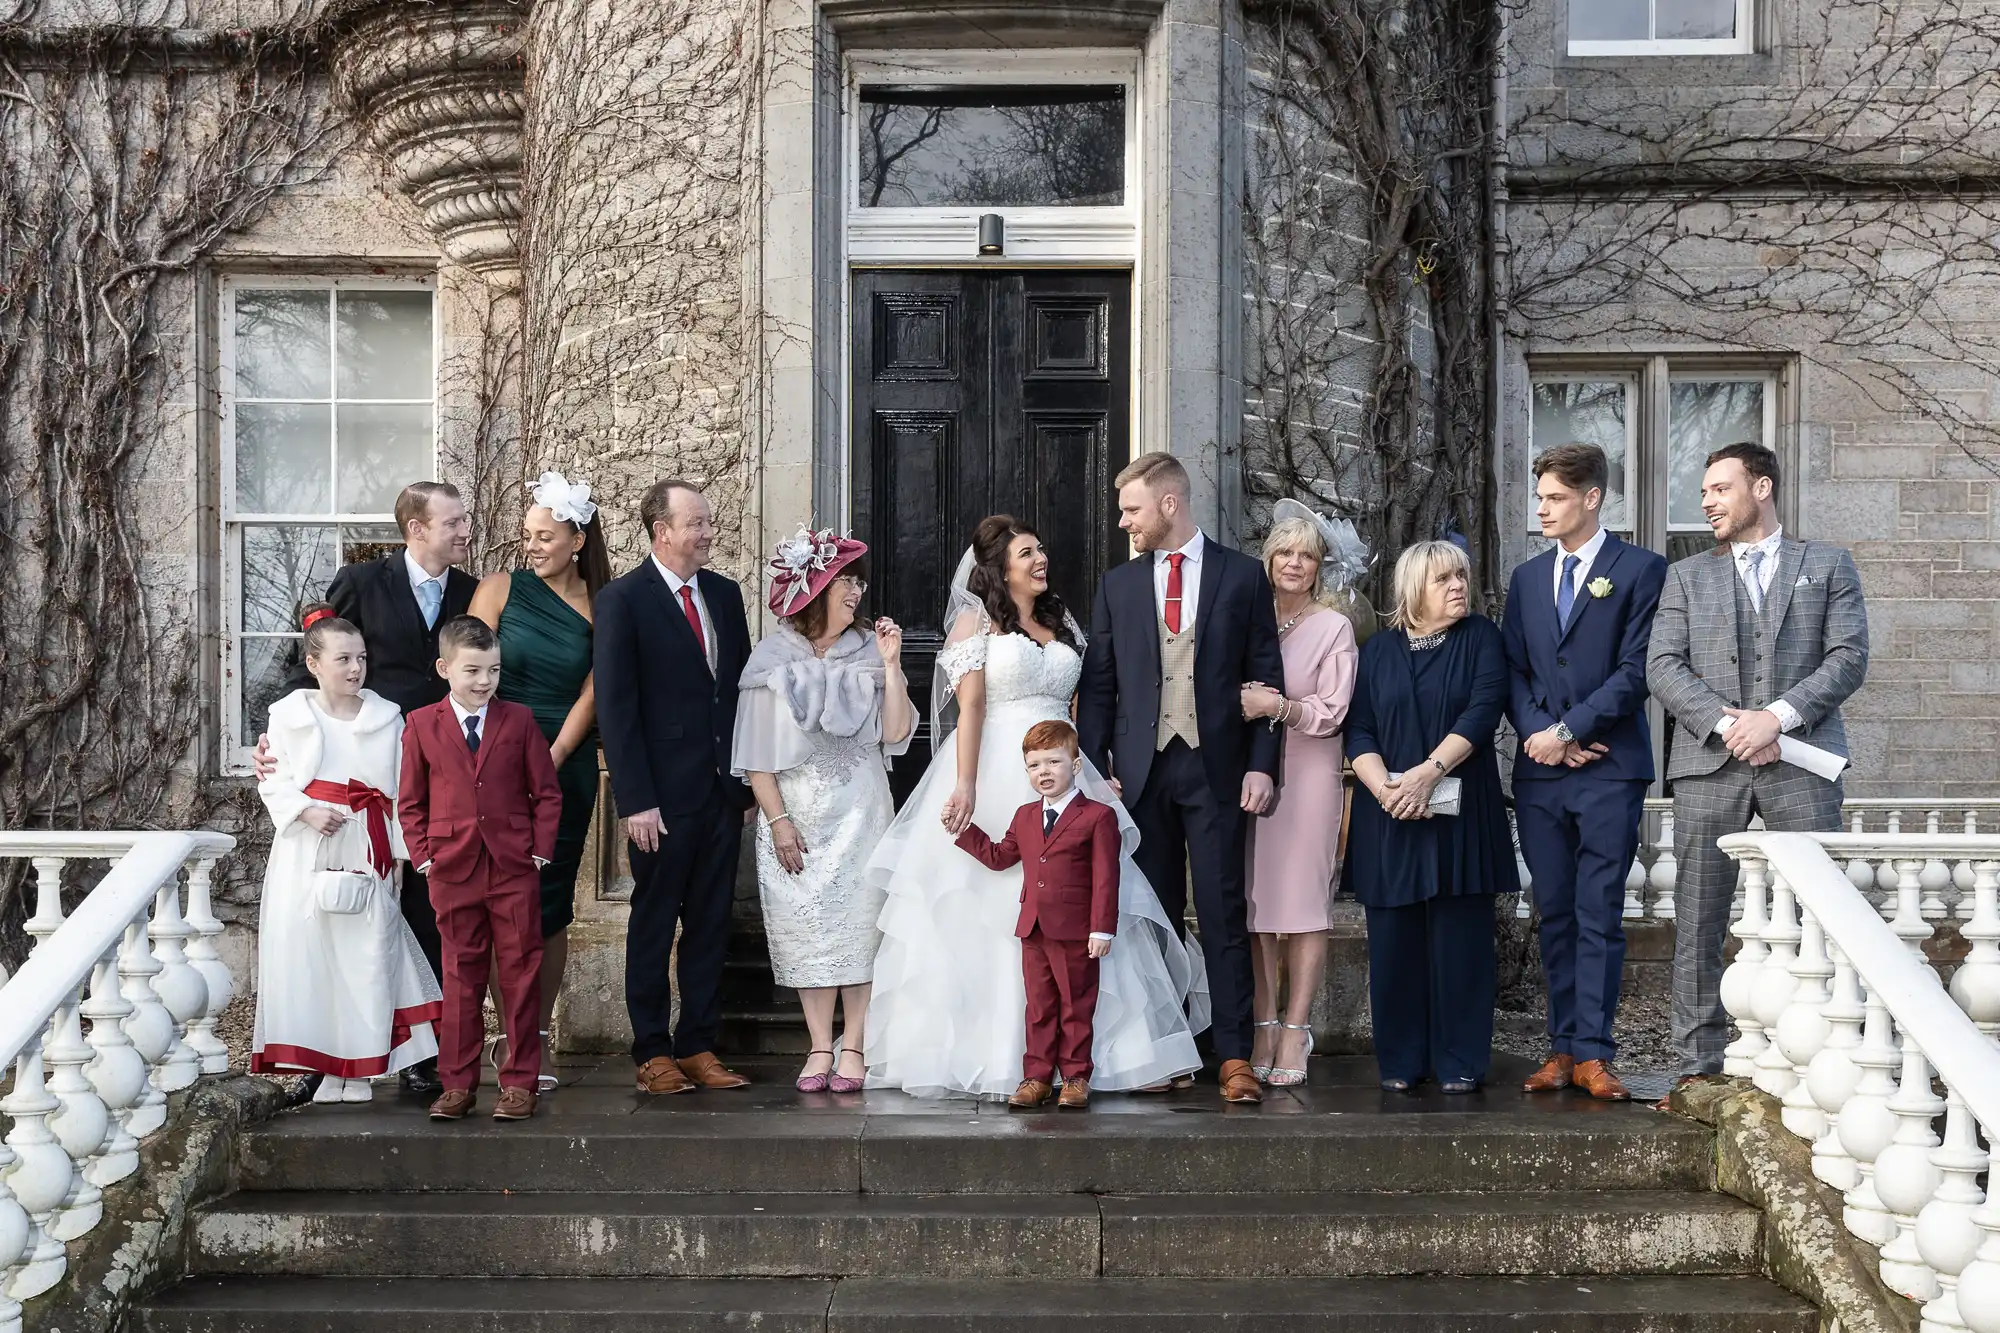 A wedding group photo featuring the bride, groom, and their family members dressed in formal attire, standing on the steps of an old stone building with vines.